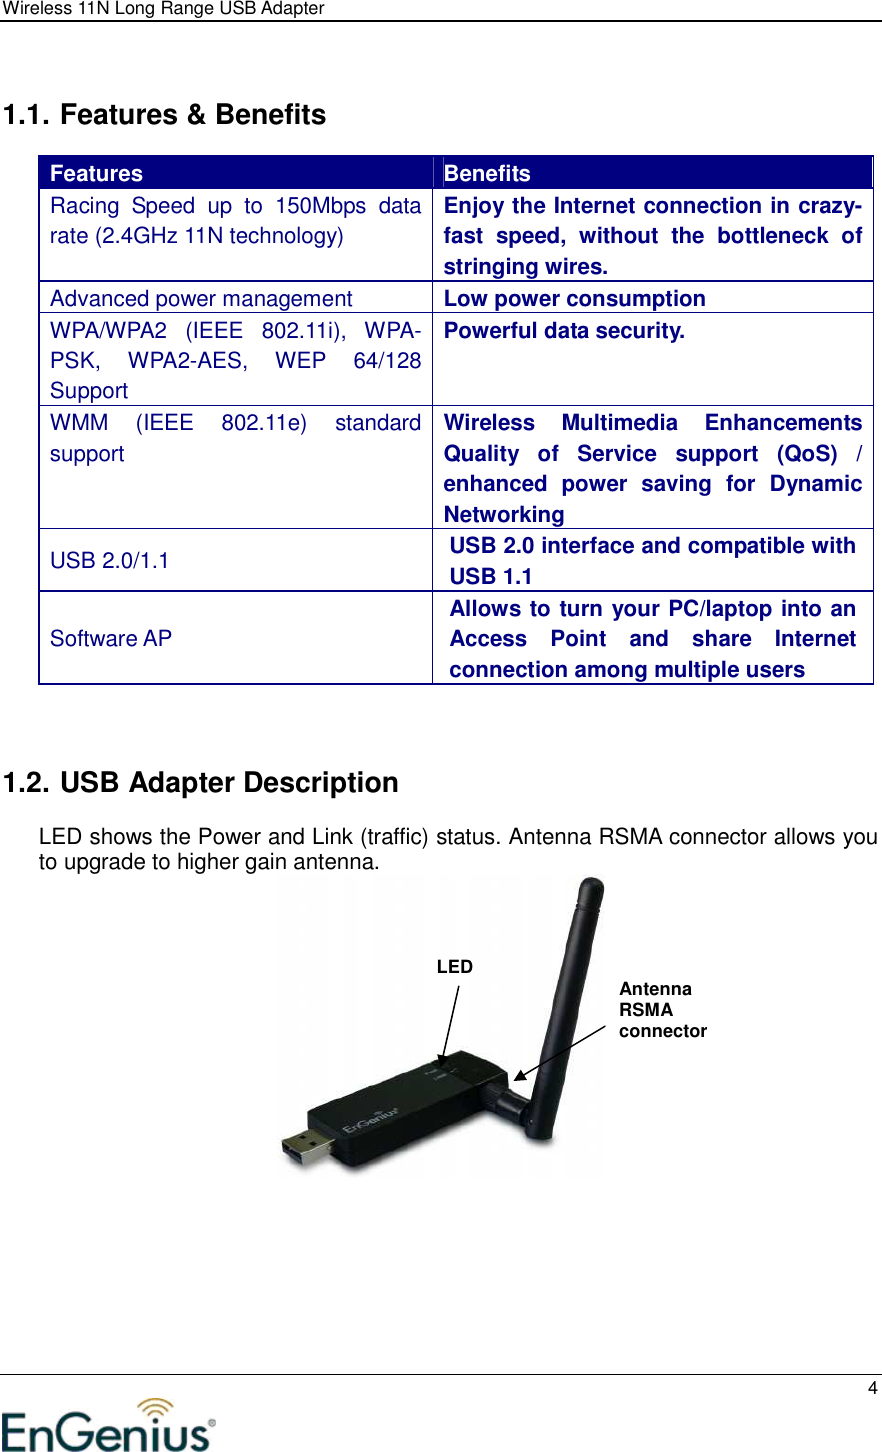 Wireless 11N Long Range USB Adapter  4   1.1. Features &amp; Benefits Features  Benefits Racing  Speed  up  to  150Mbps  data rate (2.4GHz 11N technology) Enjoy the Internet connection in crazy-fast  speed,  without  the  bottleneck  of stringing wires. Advanced power management  Low power consumption WPA/WPA2  (IEEE  802.11i),  WPA-PSK,  WPA2-AES,  WEP  64/128 Support Powerful data security. WMM  (IEEE  802.11e)  standard support  Wireless  Multimedia  Enhancements Quality  of  Service  support  (QoS)  / enhanced  power  saving  for  Dynamic Networking USB 2.0/1.1  USB 2.0 interface and compatible with USB 1.1 Software AP Allows to turn your PC/laptop into an Access  Point  and  share  Internet connection among multiple users    1.2. USB Adapter Description LED shows the Power and Link (traffic) status. Antenna RSMA connector allows you to upgrade to higher gain antenna.     LED Antenna RSMA connector 